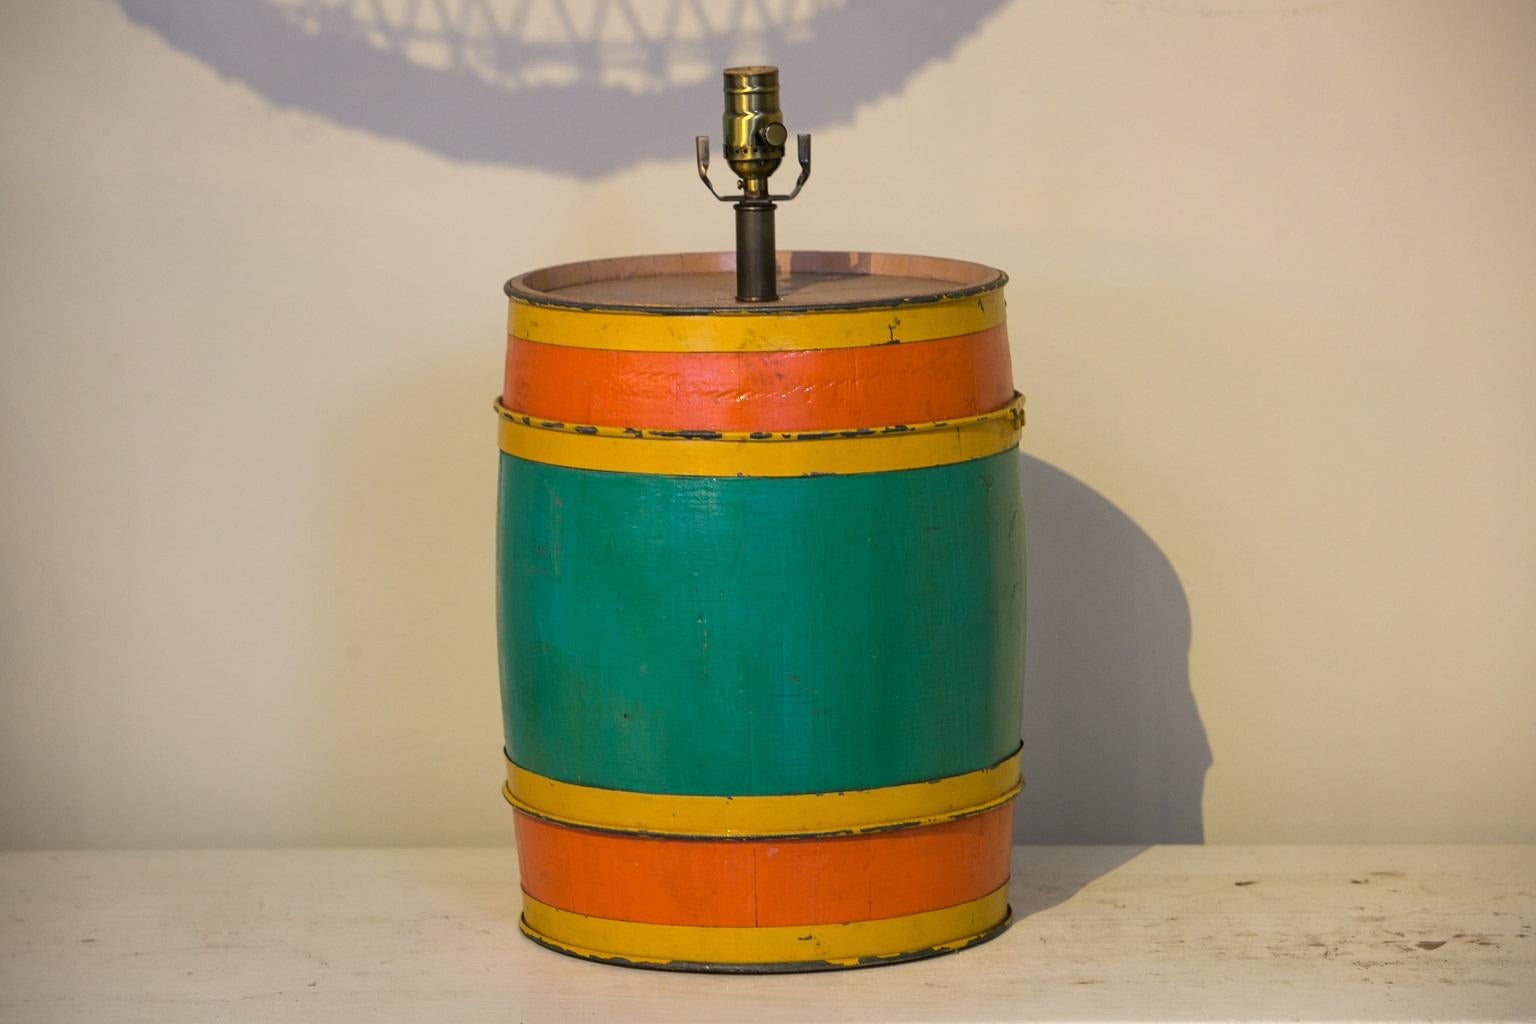 Carnival barrel table lamp, newly wired for use within the USA. This charming lamp comes from a hand-painted, hand-made carnival barrel. I find the colors so happy and colorful on this one-of-a-kind lamp. I suppose its style is coastal or country,